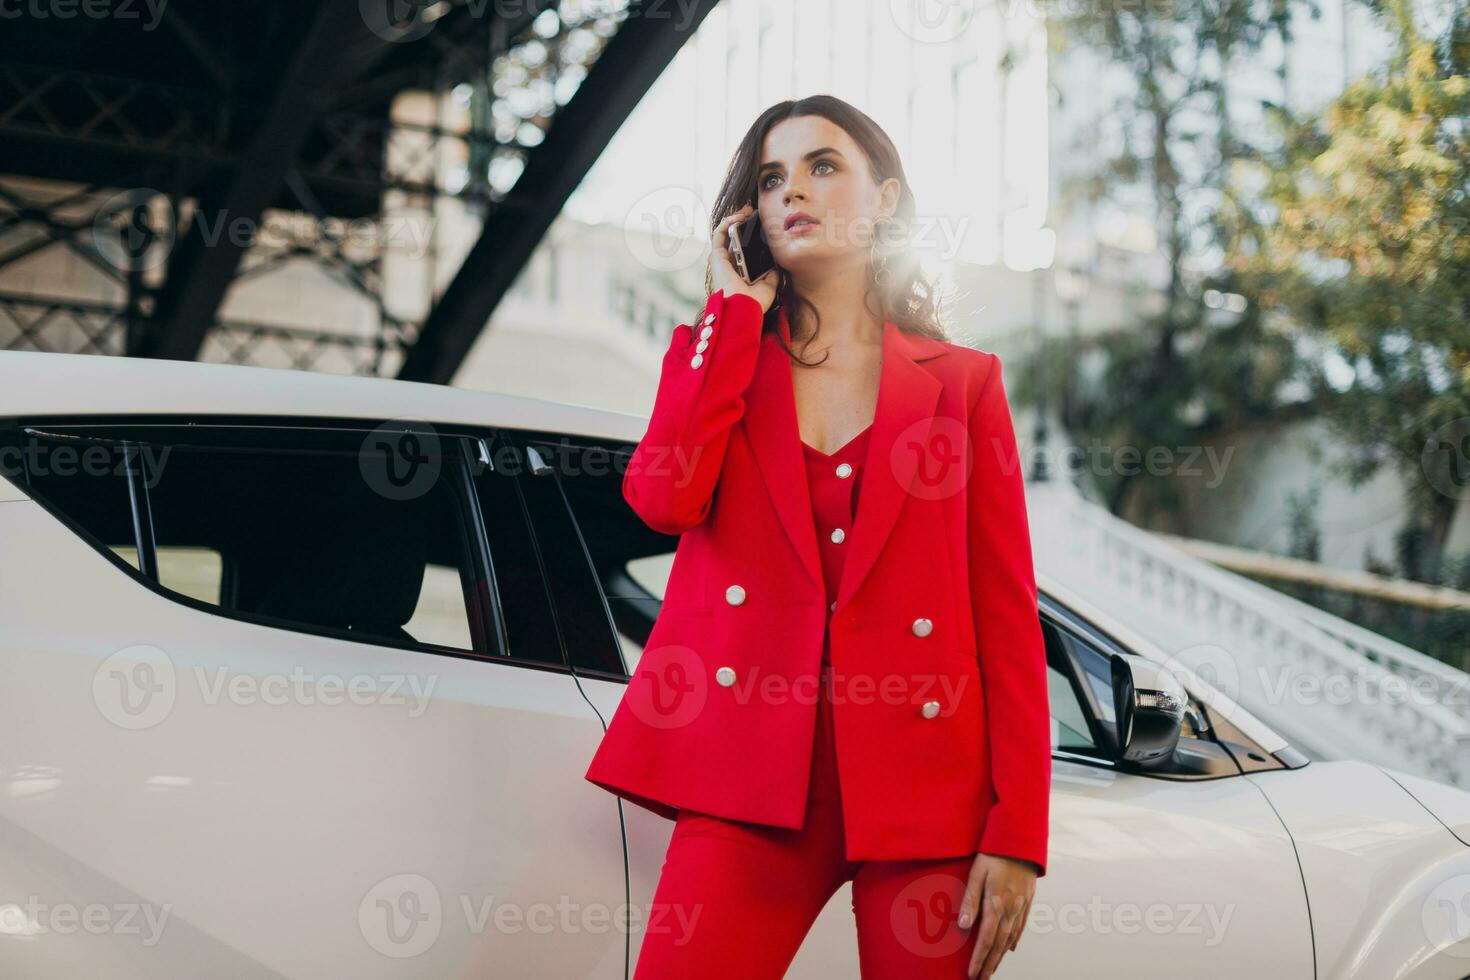 beautiful sexy woman in red suit posing at car talking on business on phone photo